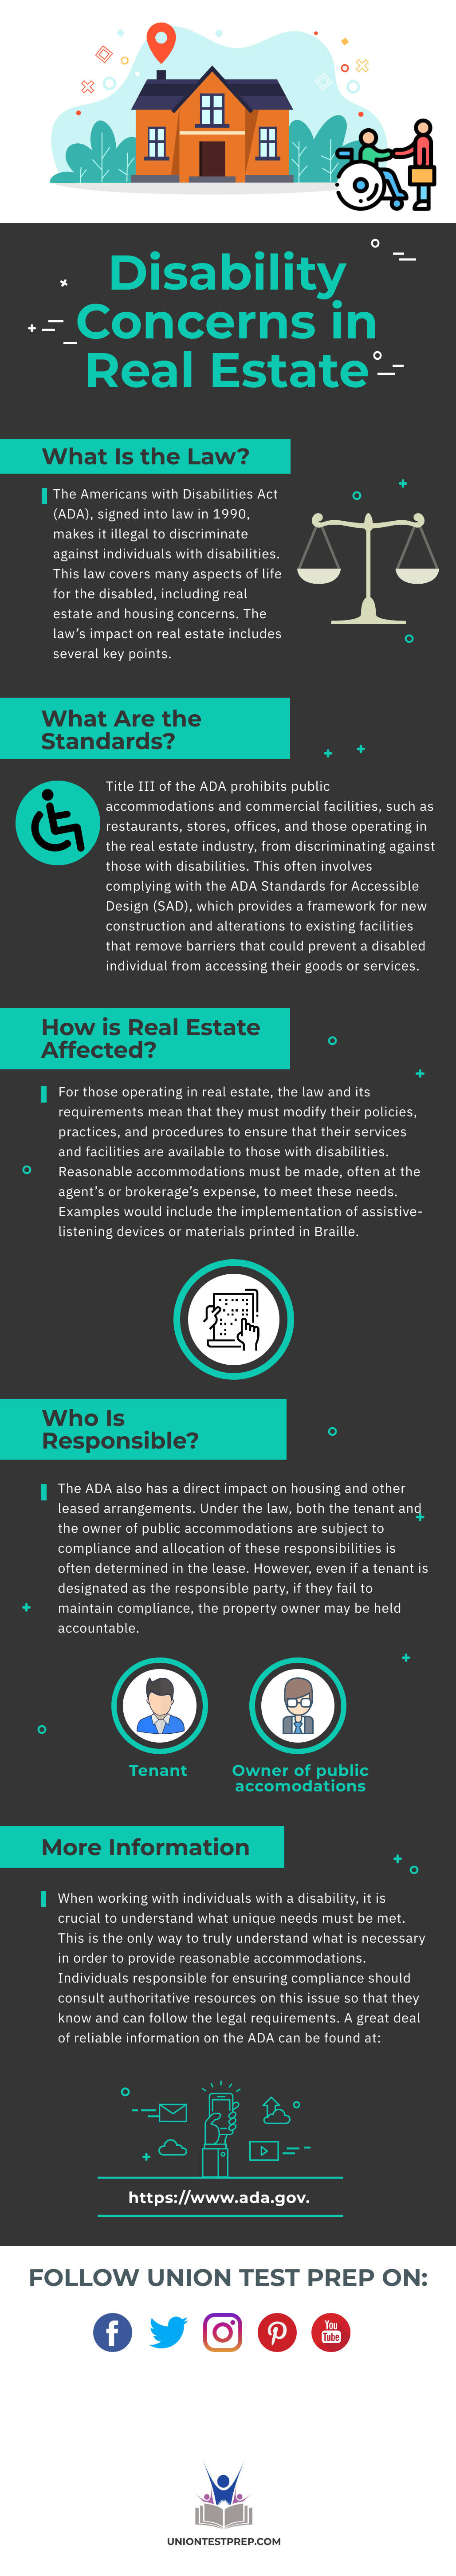 Disability Laws in Real Estate